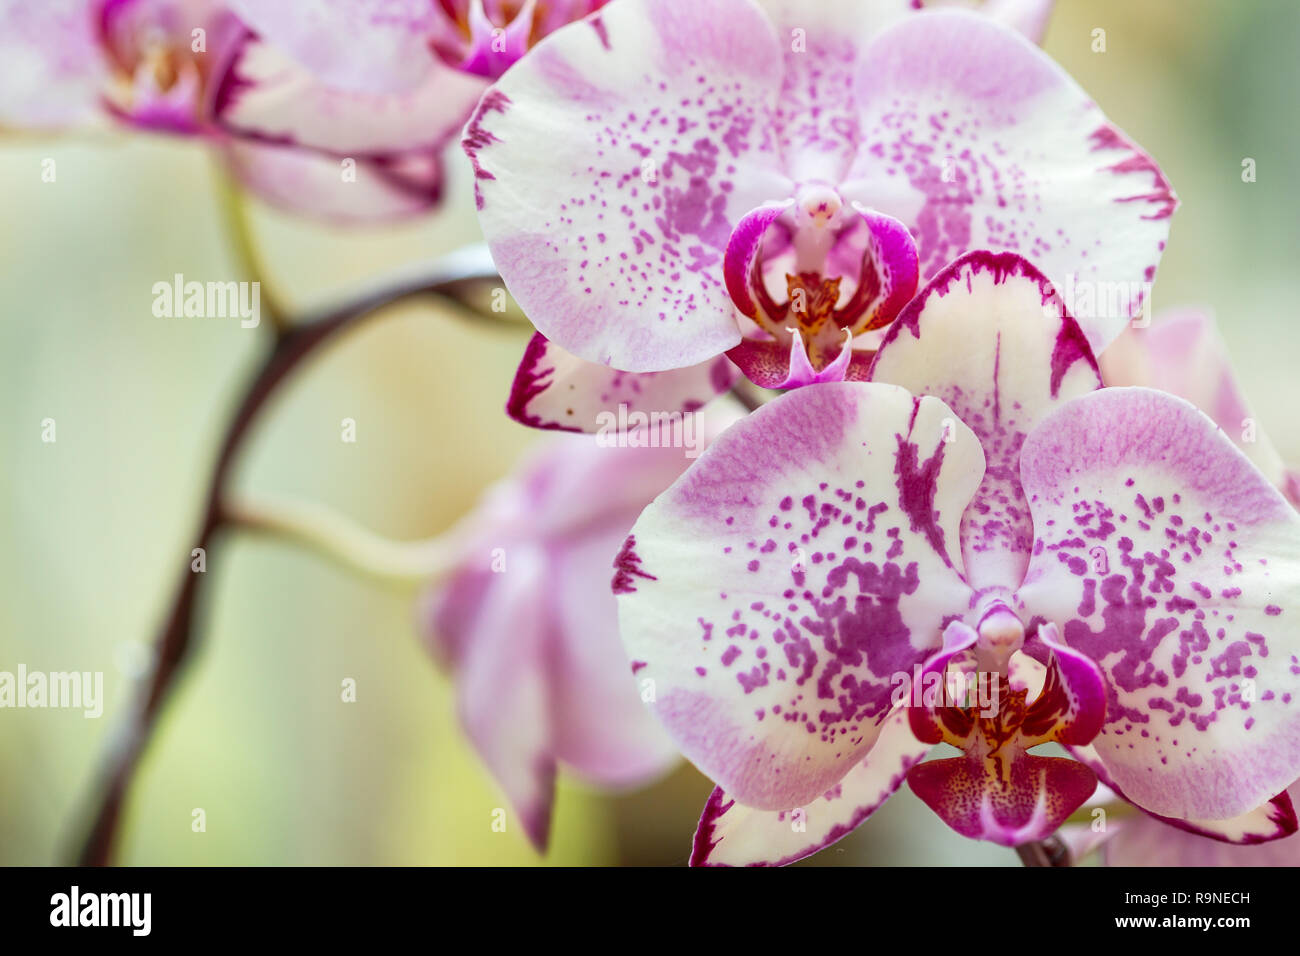 Pink Spotted Phalaenopsis Orchid Stock Photo